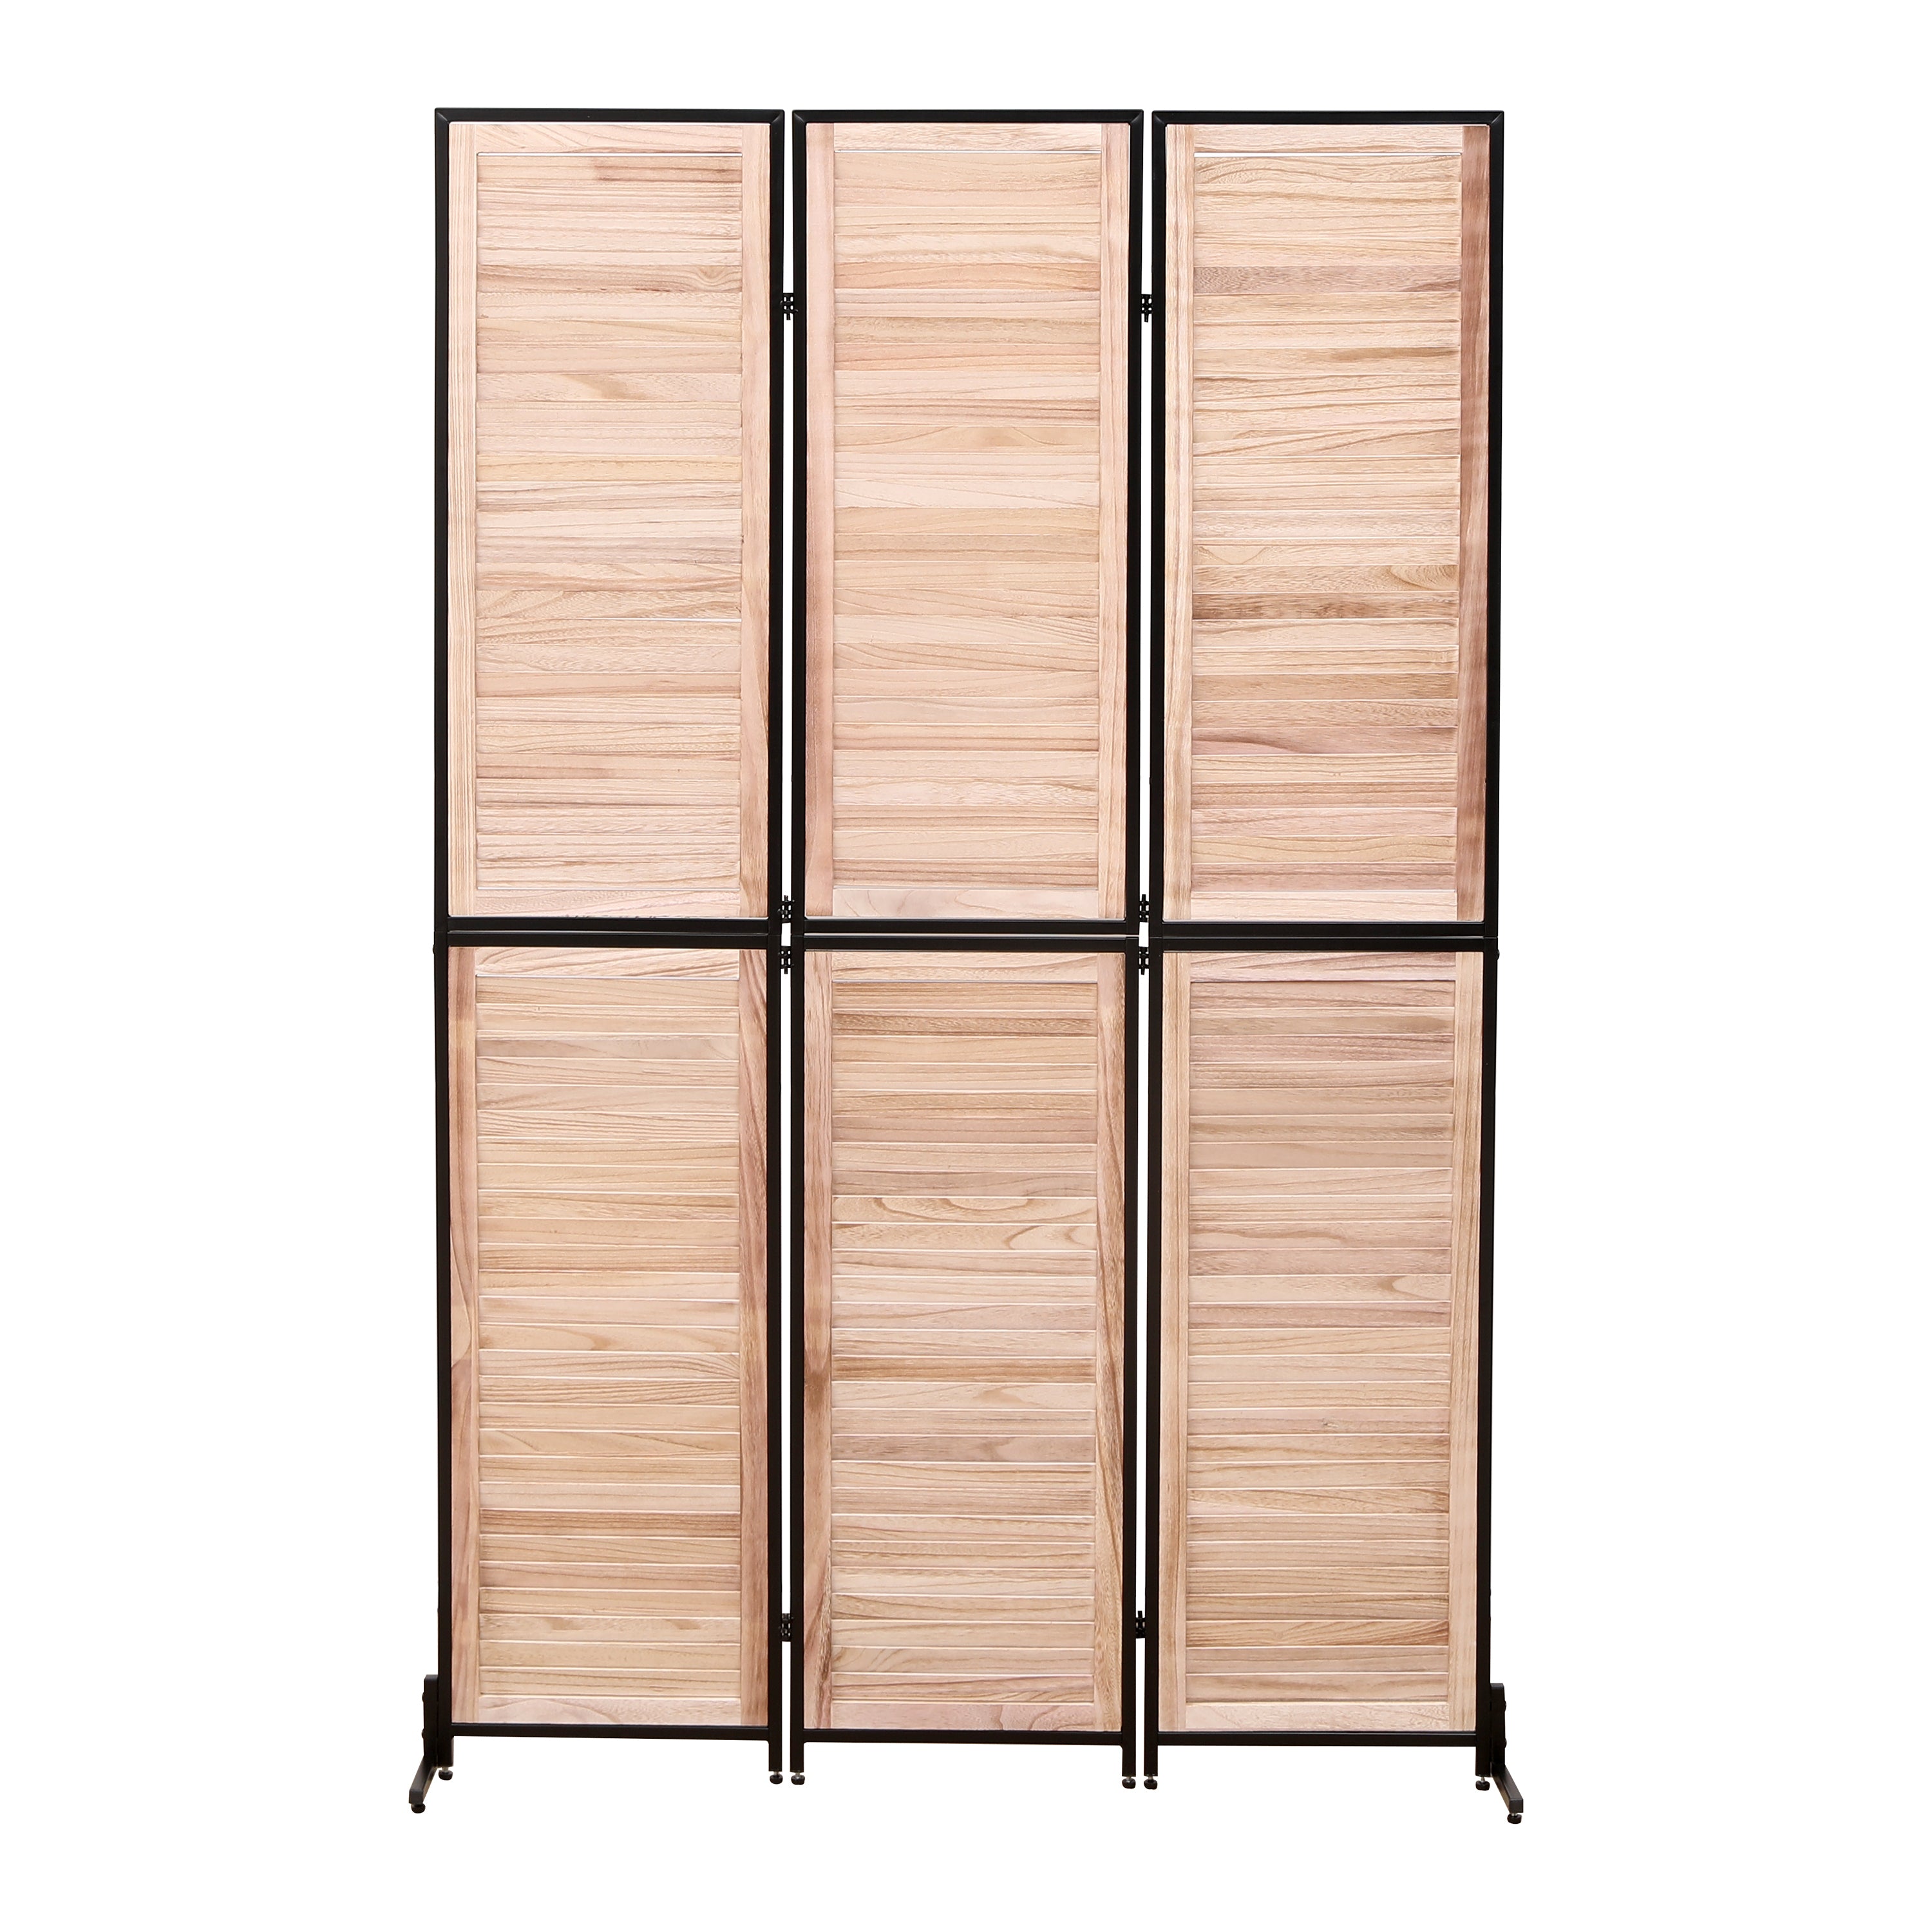 3 Panel Room Dividers and Folding Privacy Screen Natural Wooden Room Partitions 6ft - Natural